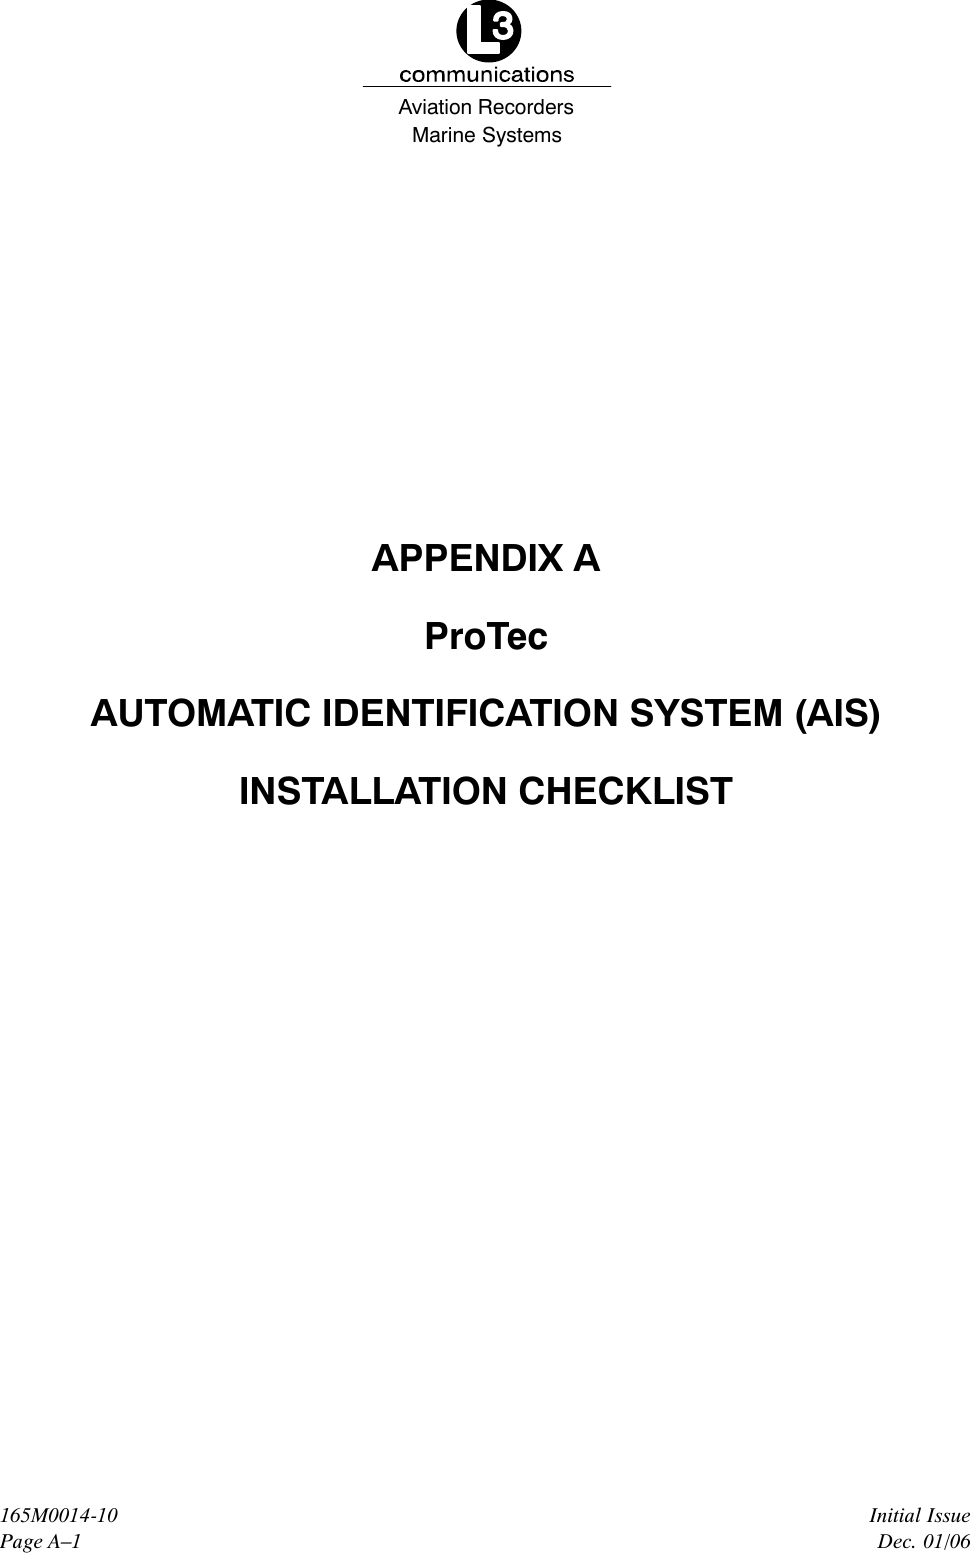 Marine SystemsAviation RecordersInitial IssueDec. 01/06165M0014-10Page A–1APPENDIX AProTecAUTOMATIC IDENTIFICATION SYSTEM (AIS)INSTALLATION CHECKLIST